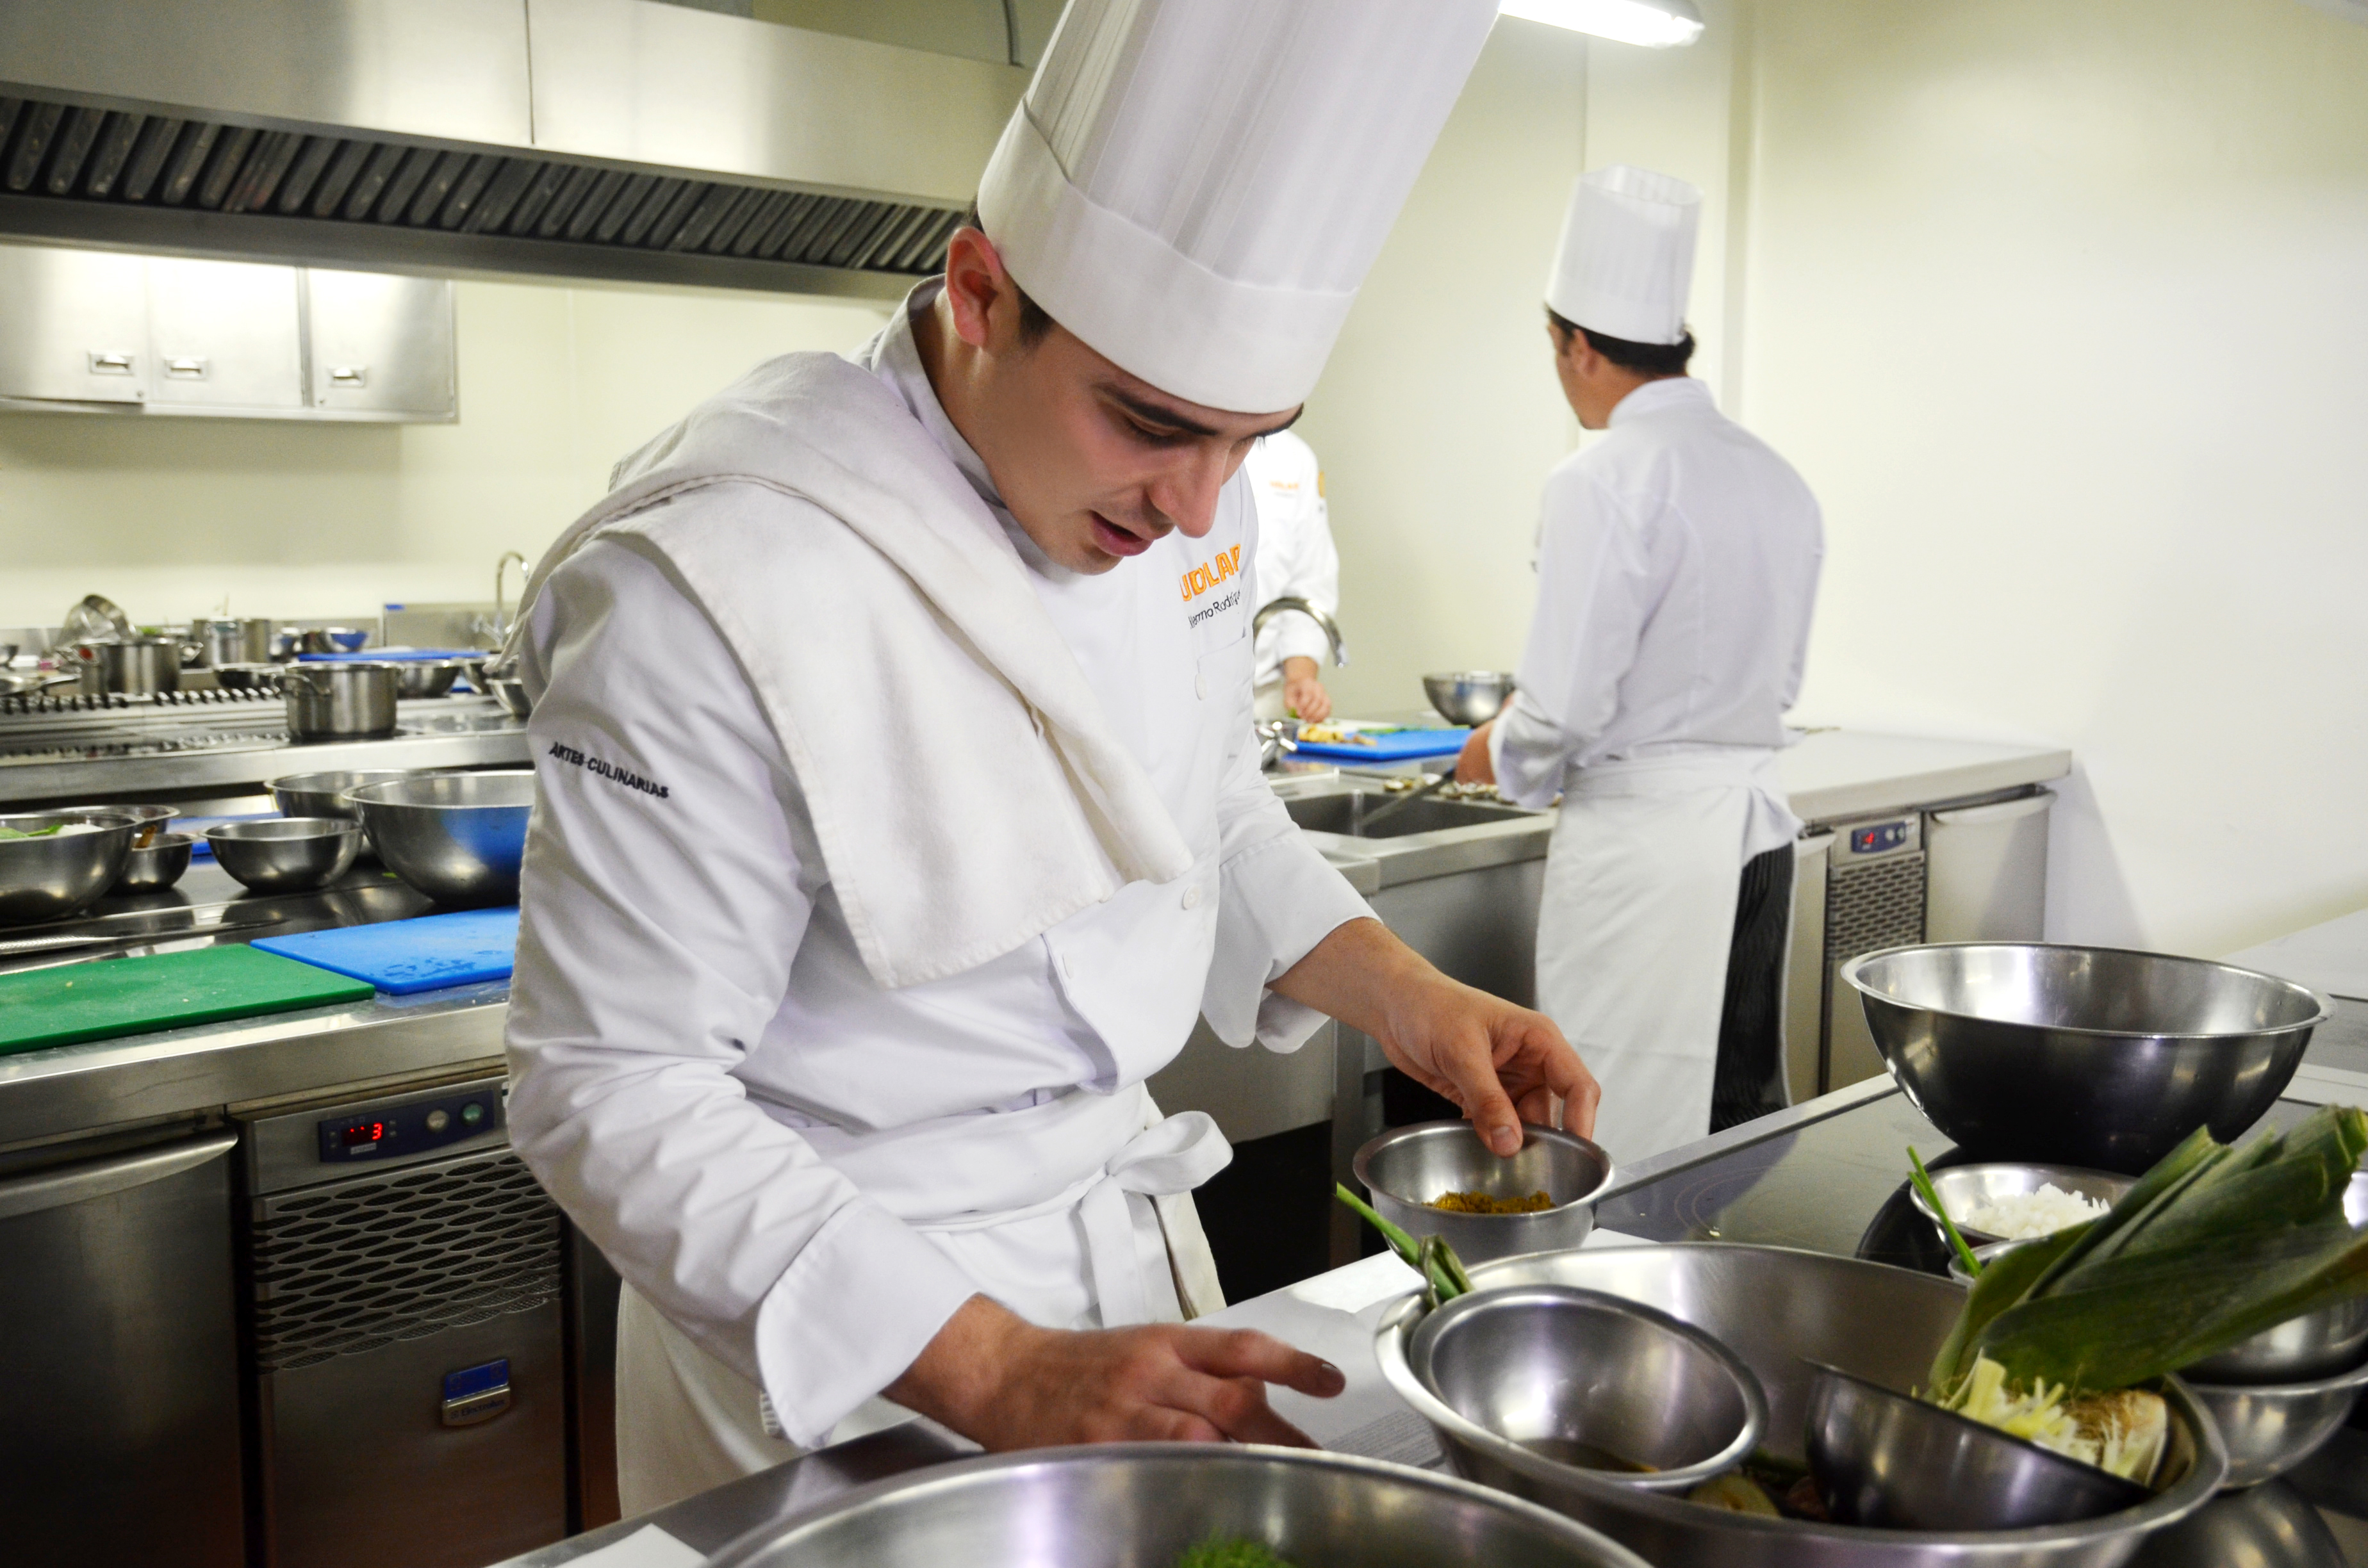 Catering jobs in north lincolnshire